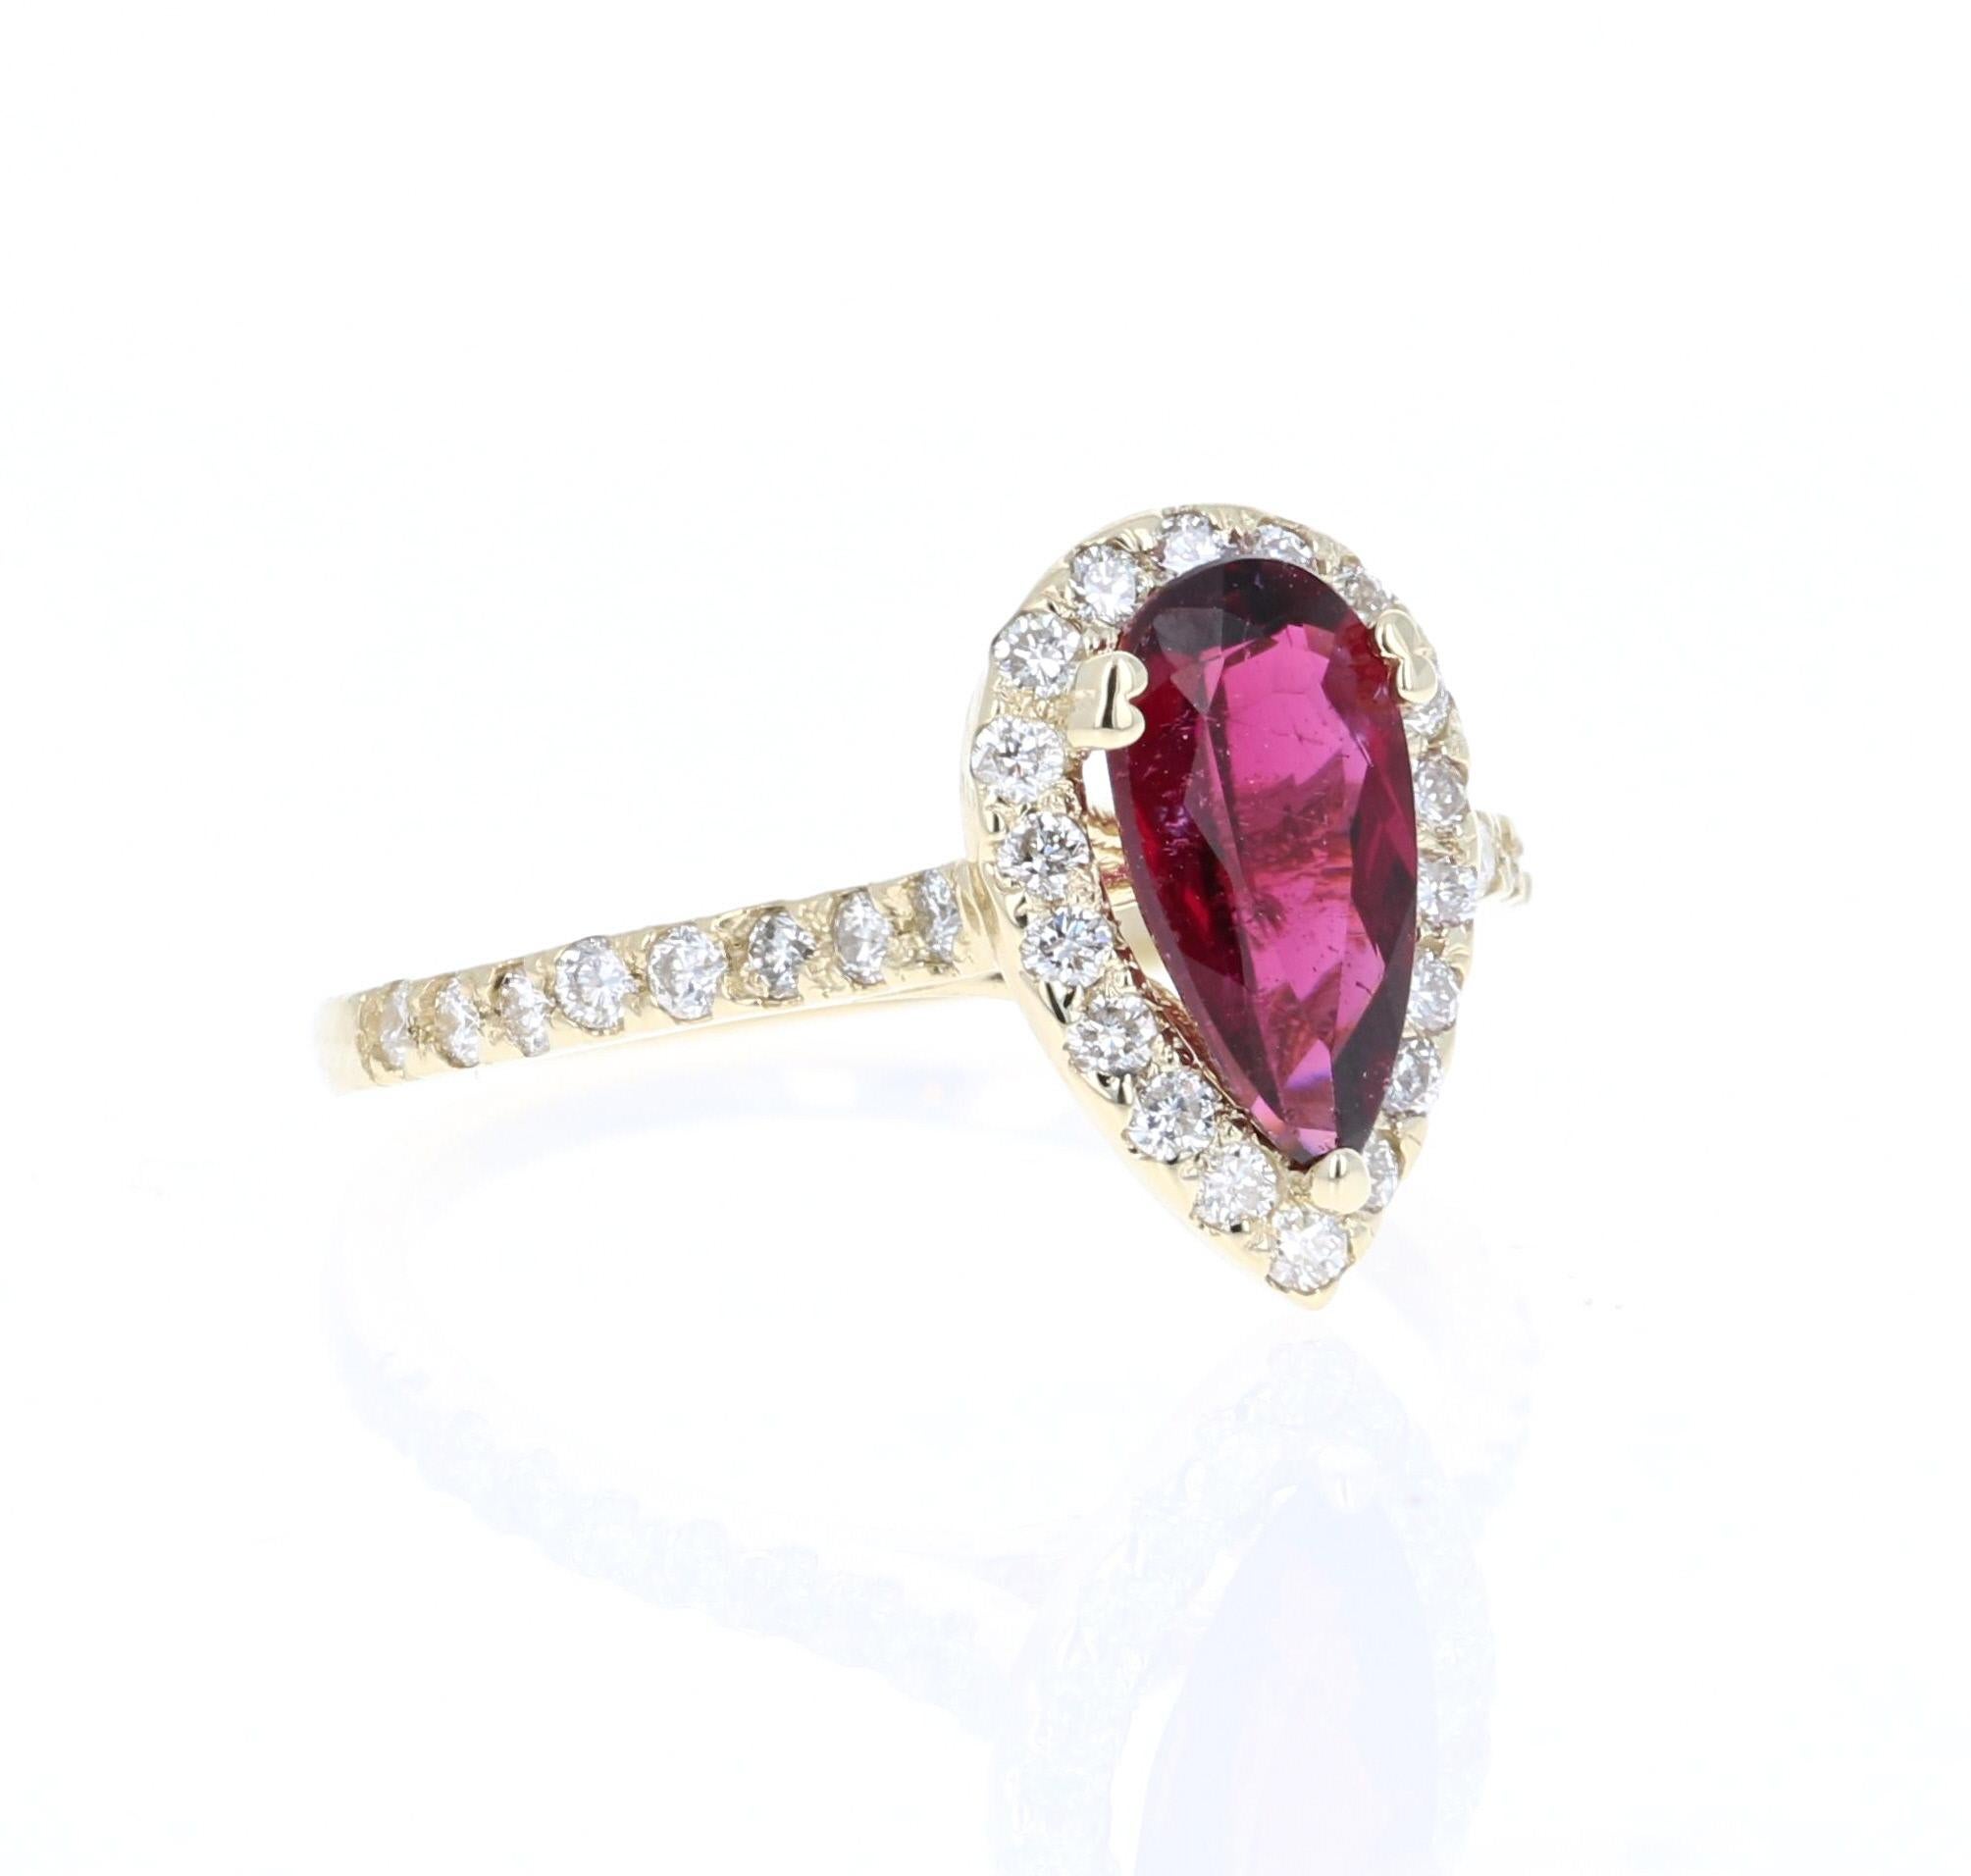 1.63 Carat Tourmaline Diamond 14K Yellow Gold Engagement Ring.
This stunning piece has a beautiful Pear Cut Red Tourmaline set in the center of the ring.  
The Tourmaline is surrounded by a Halo of 24 Round Cut Diamonds that weigh 0.49 carats